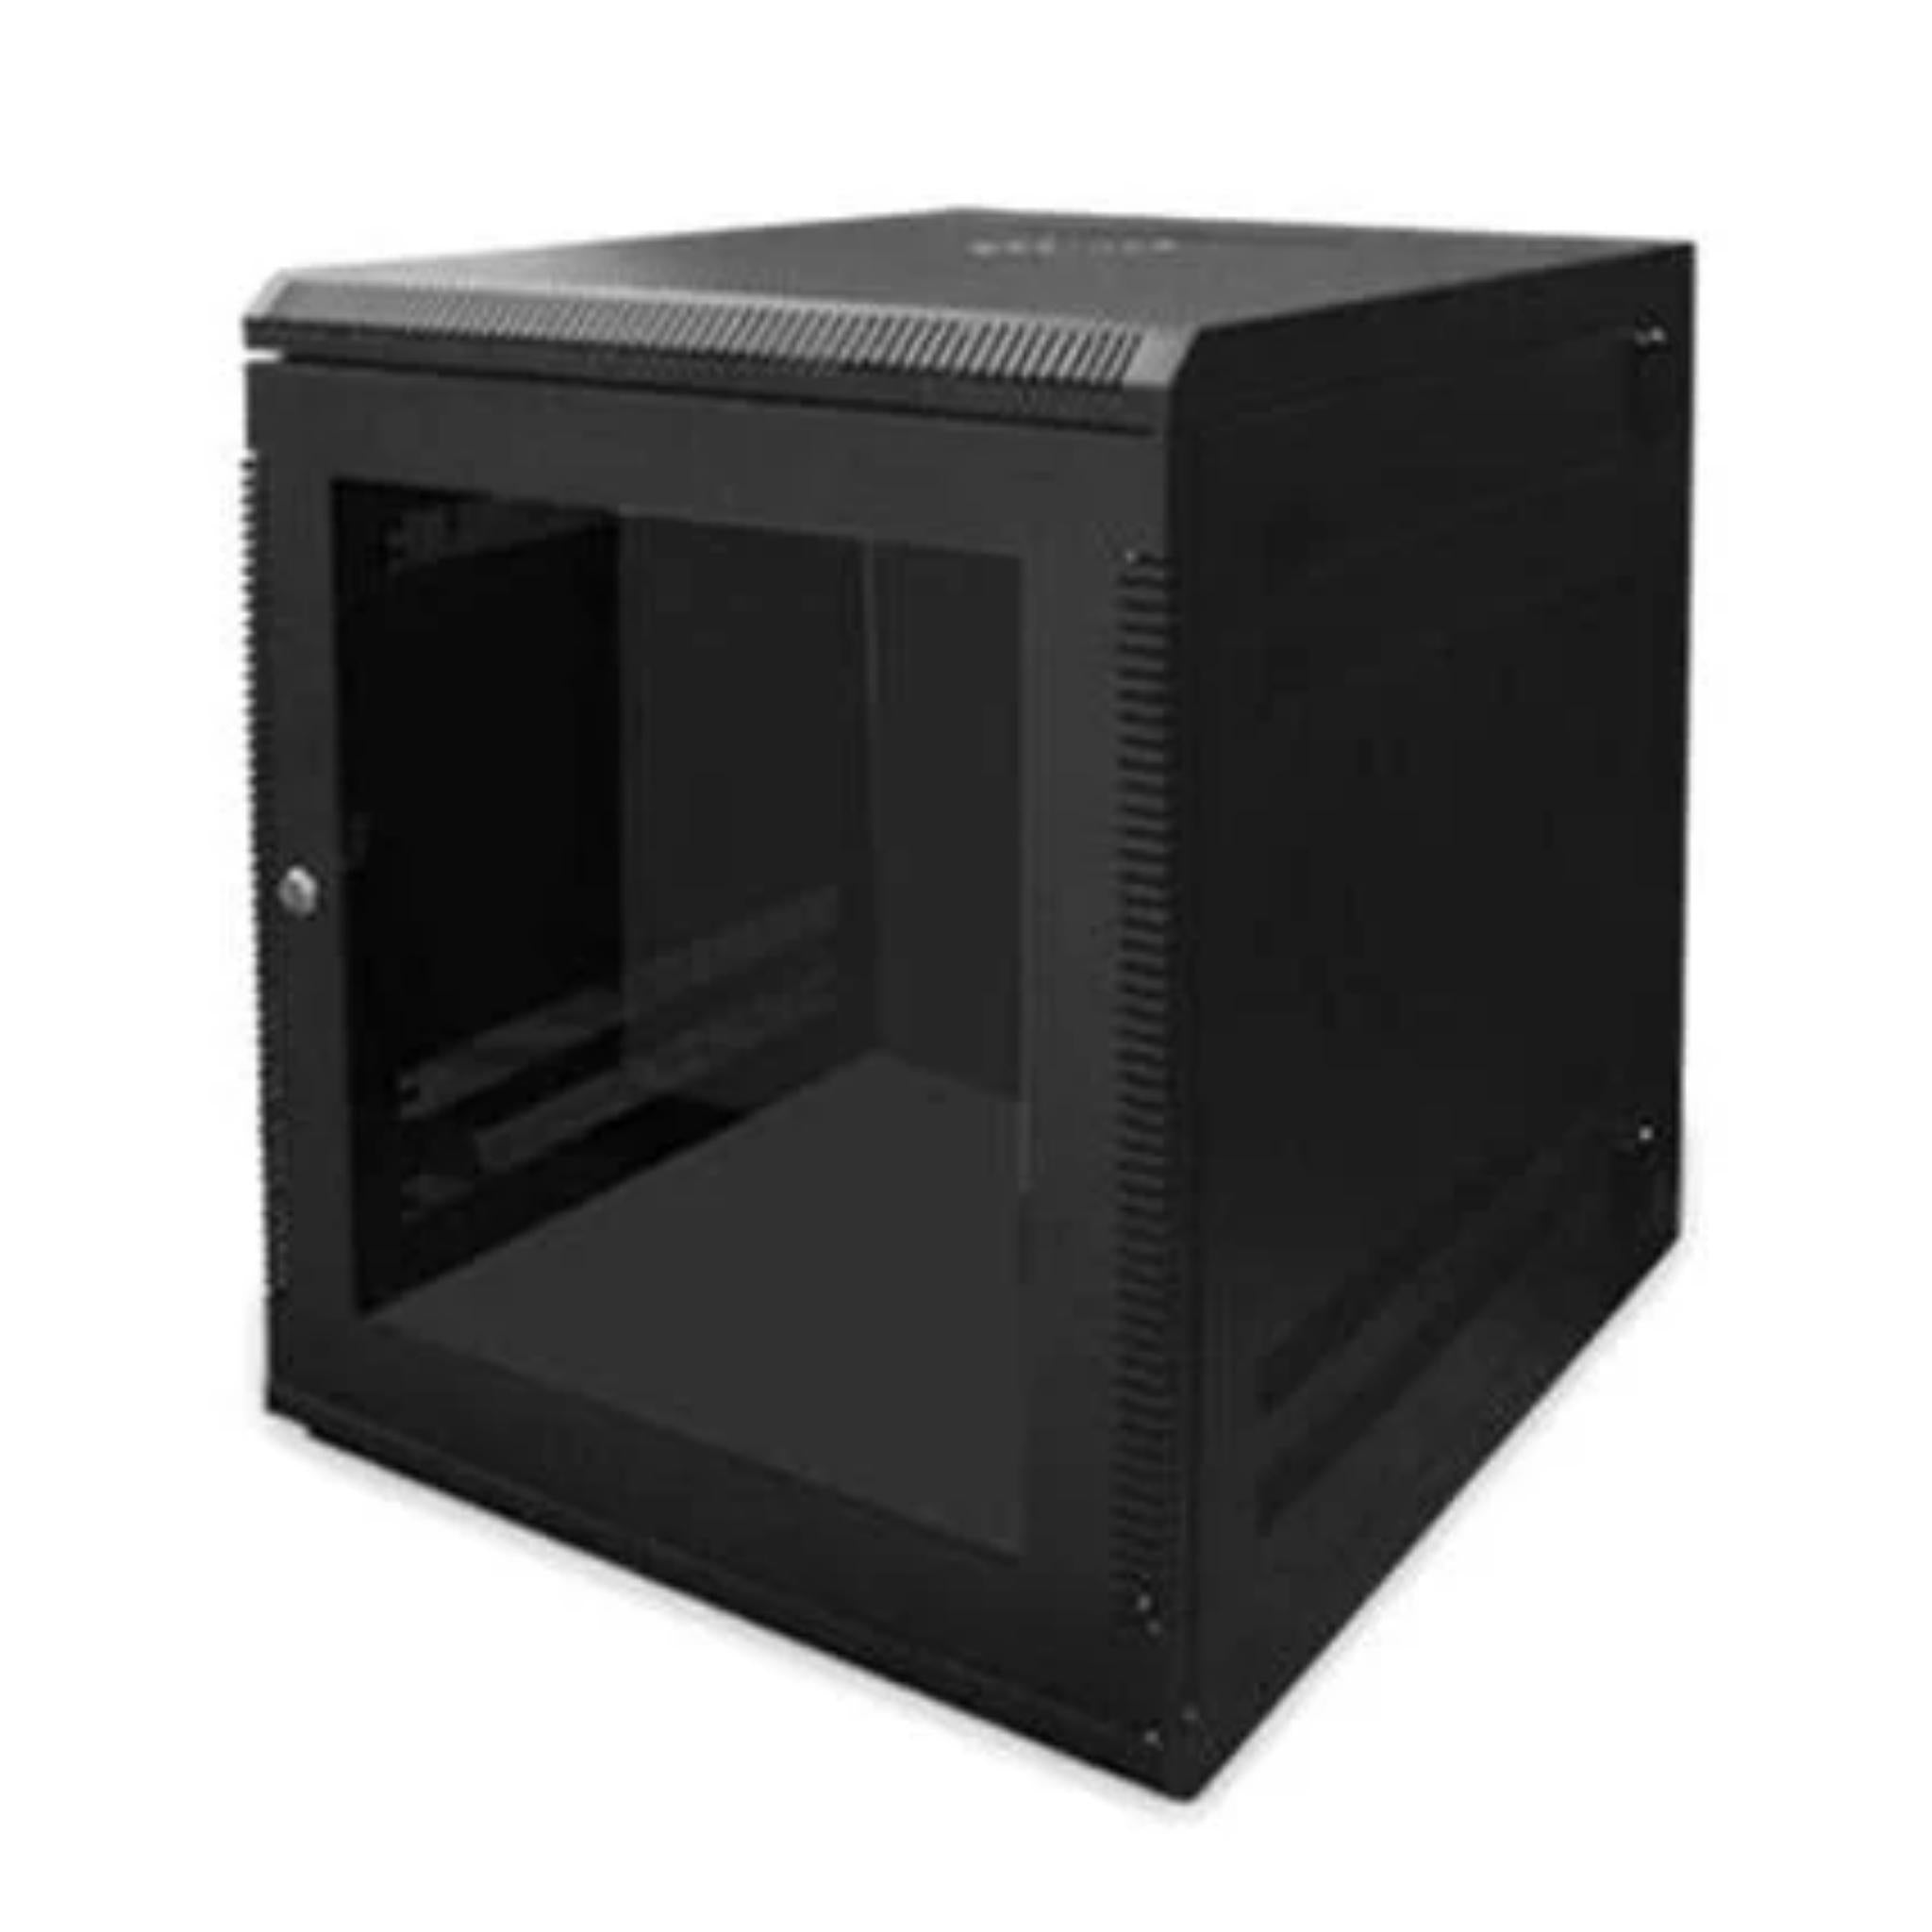 "Premium 12U Network Server Rack with Heavy Duty Steel Frame, Tempered Glass Door, and Reversible Handing for Enhanced Cooling"